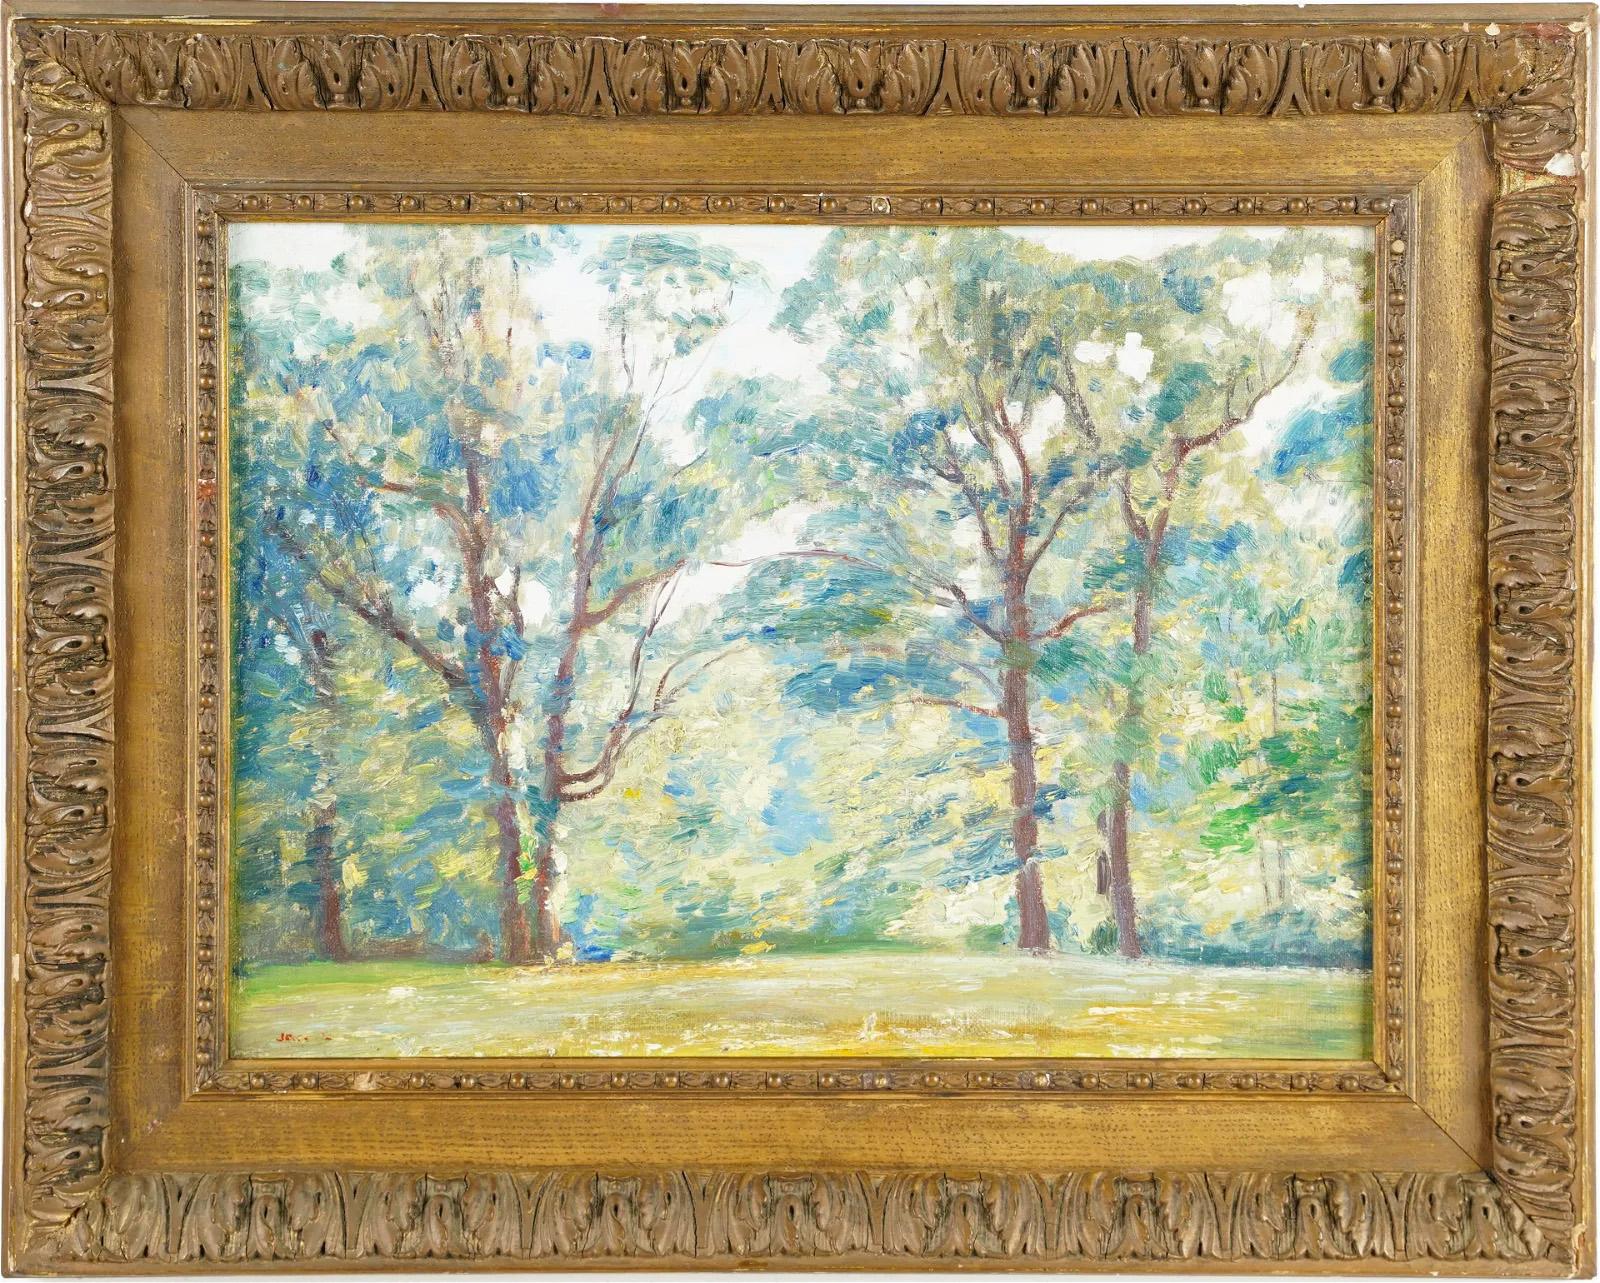 Very finely painted American impressionist landscape painting.  Housed in a great period impressionist frame.  Partial signature remains lower left.  Has the feel of an important piece!  Oil on board.  Framed.  Image size, 12H x 16L.  Signed